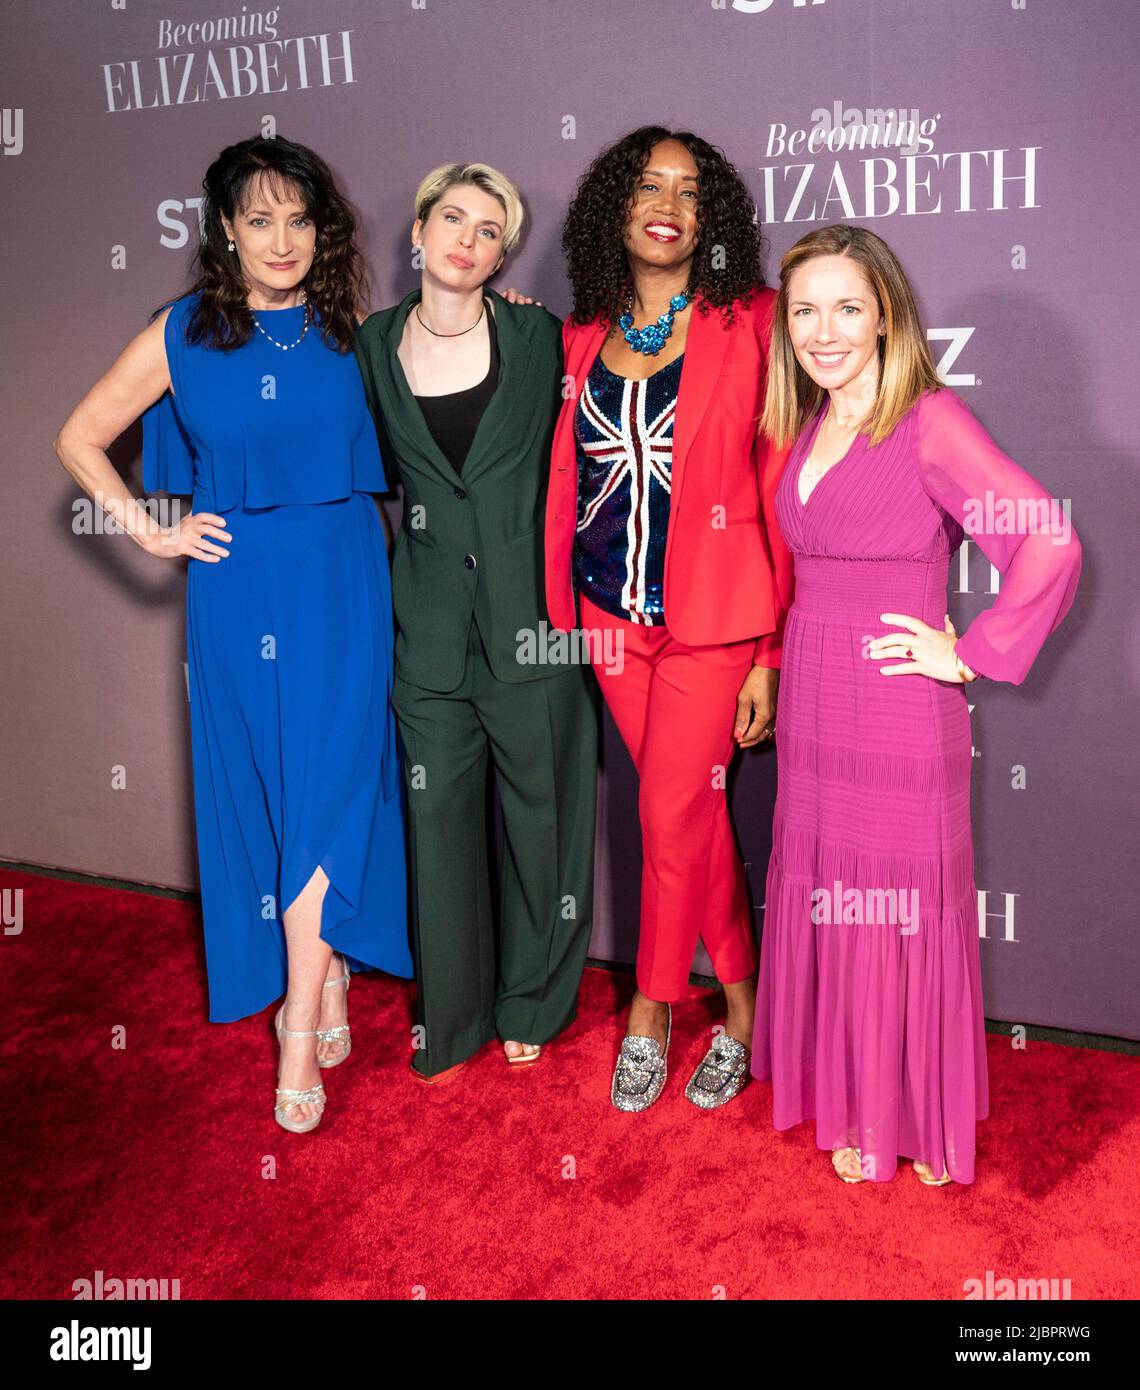 June 7 22 New York New York United States Karen Bailey Anya Reiss Kathryn Bsuby Alison Hoffman Attend Starz S Becoming Elizabeth New York Premiere At The Plaza Hotel Credit Image C Lev